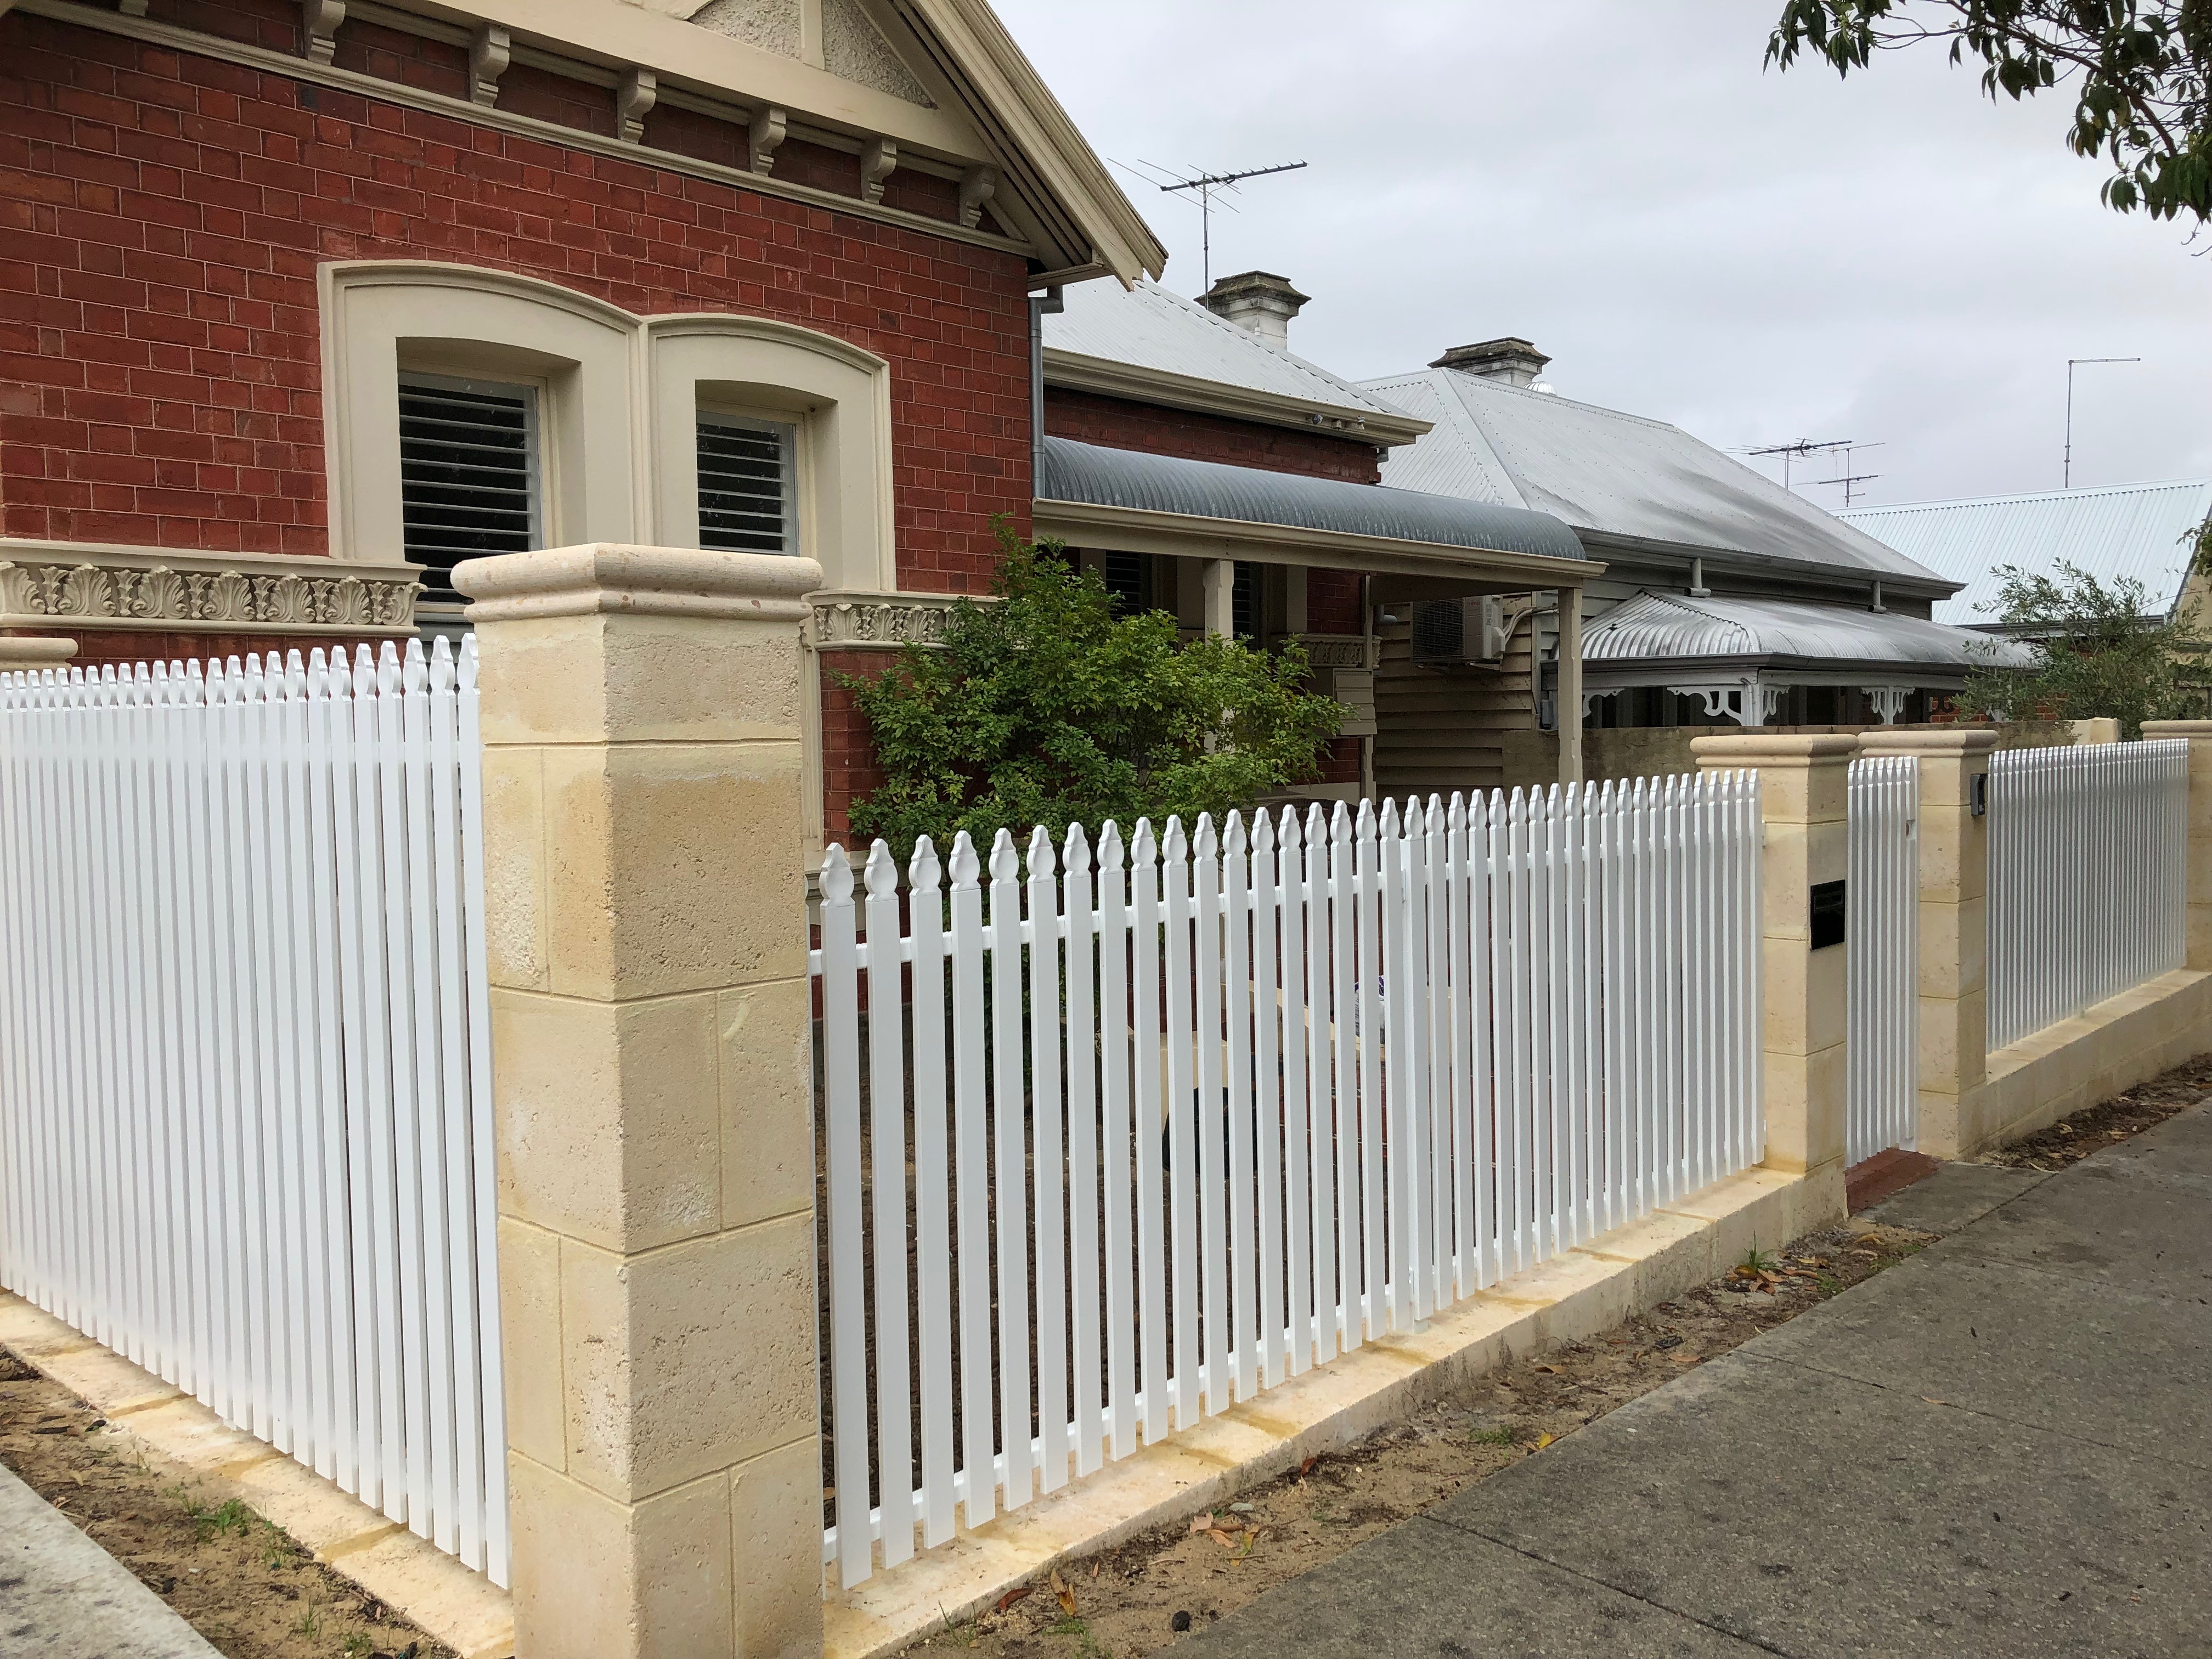 Federation picket - fence and gate